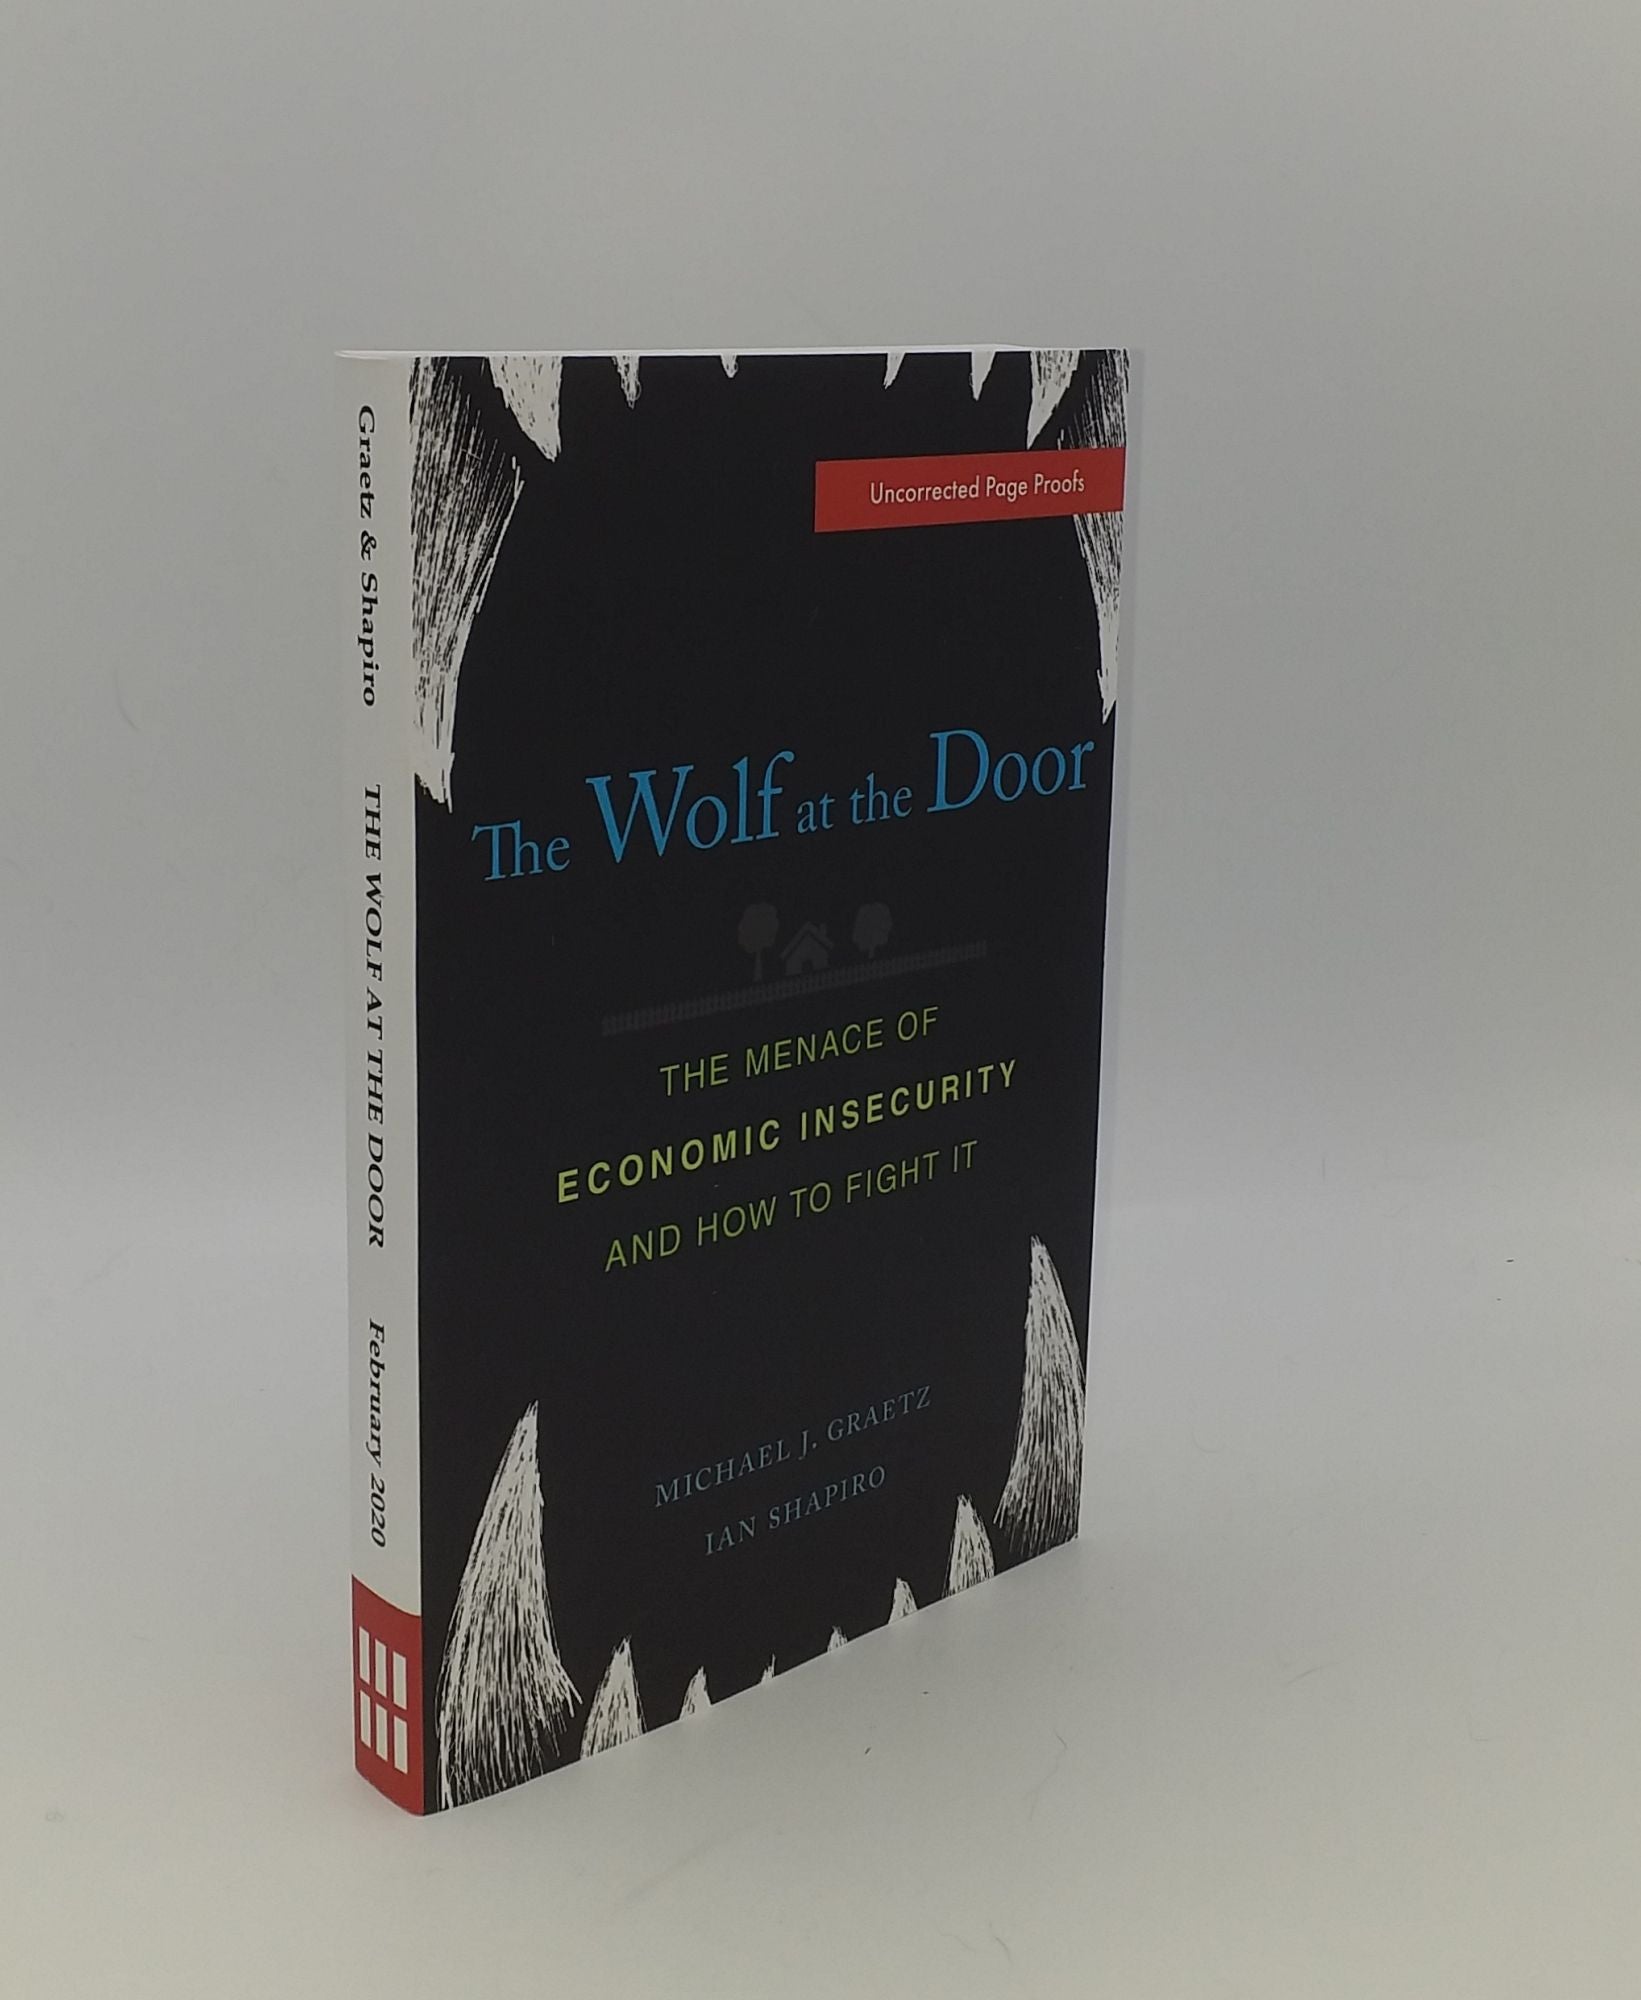 GRAETZ Michael J., SHAPIRO Ian - The Wolf at the Door the Menace of Economic Insecurity and How to Fight It